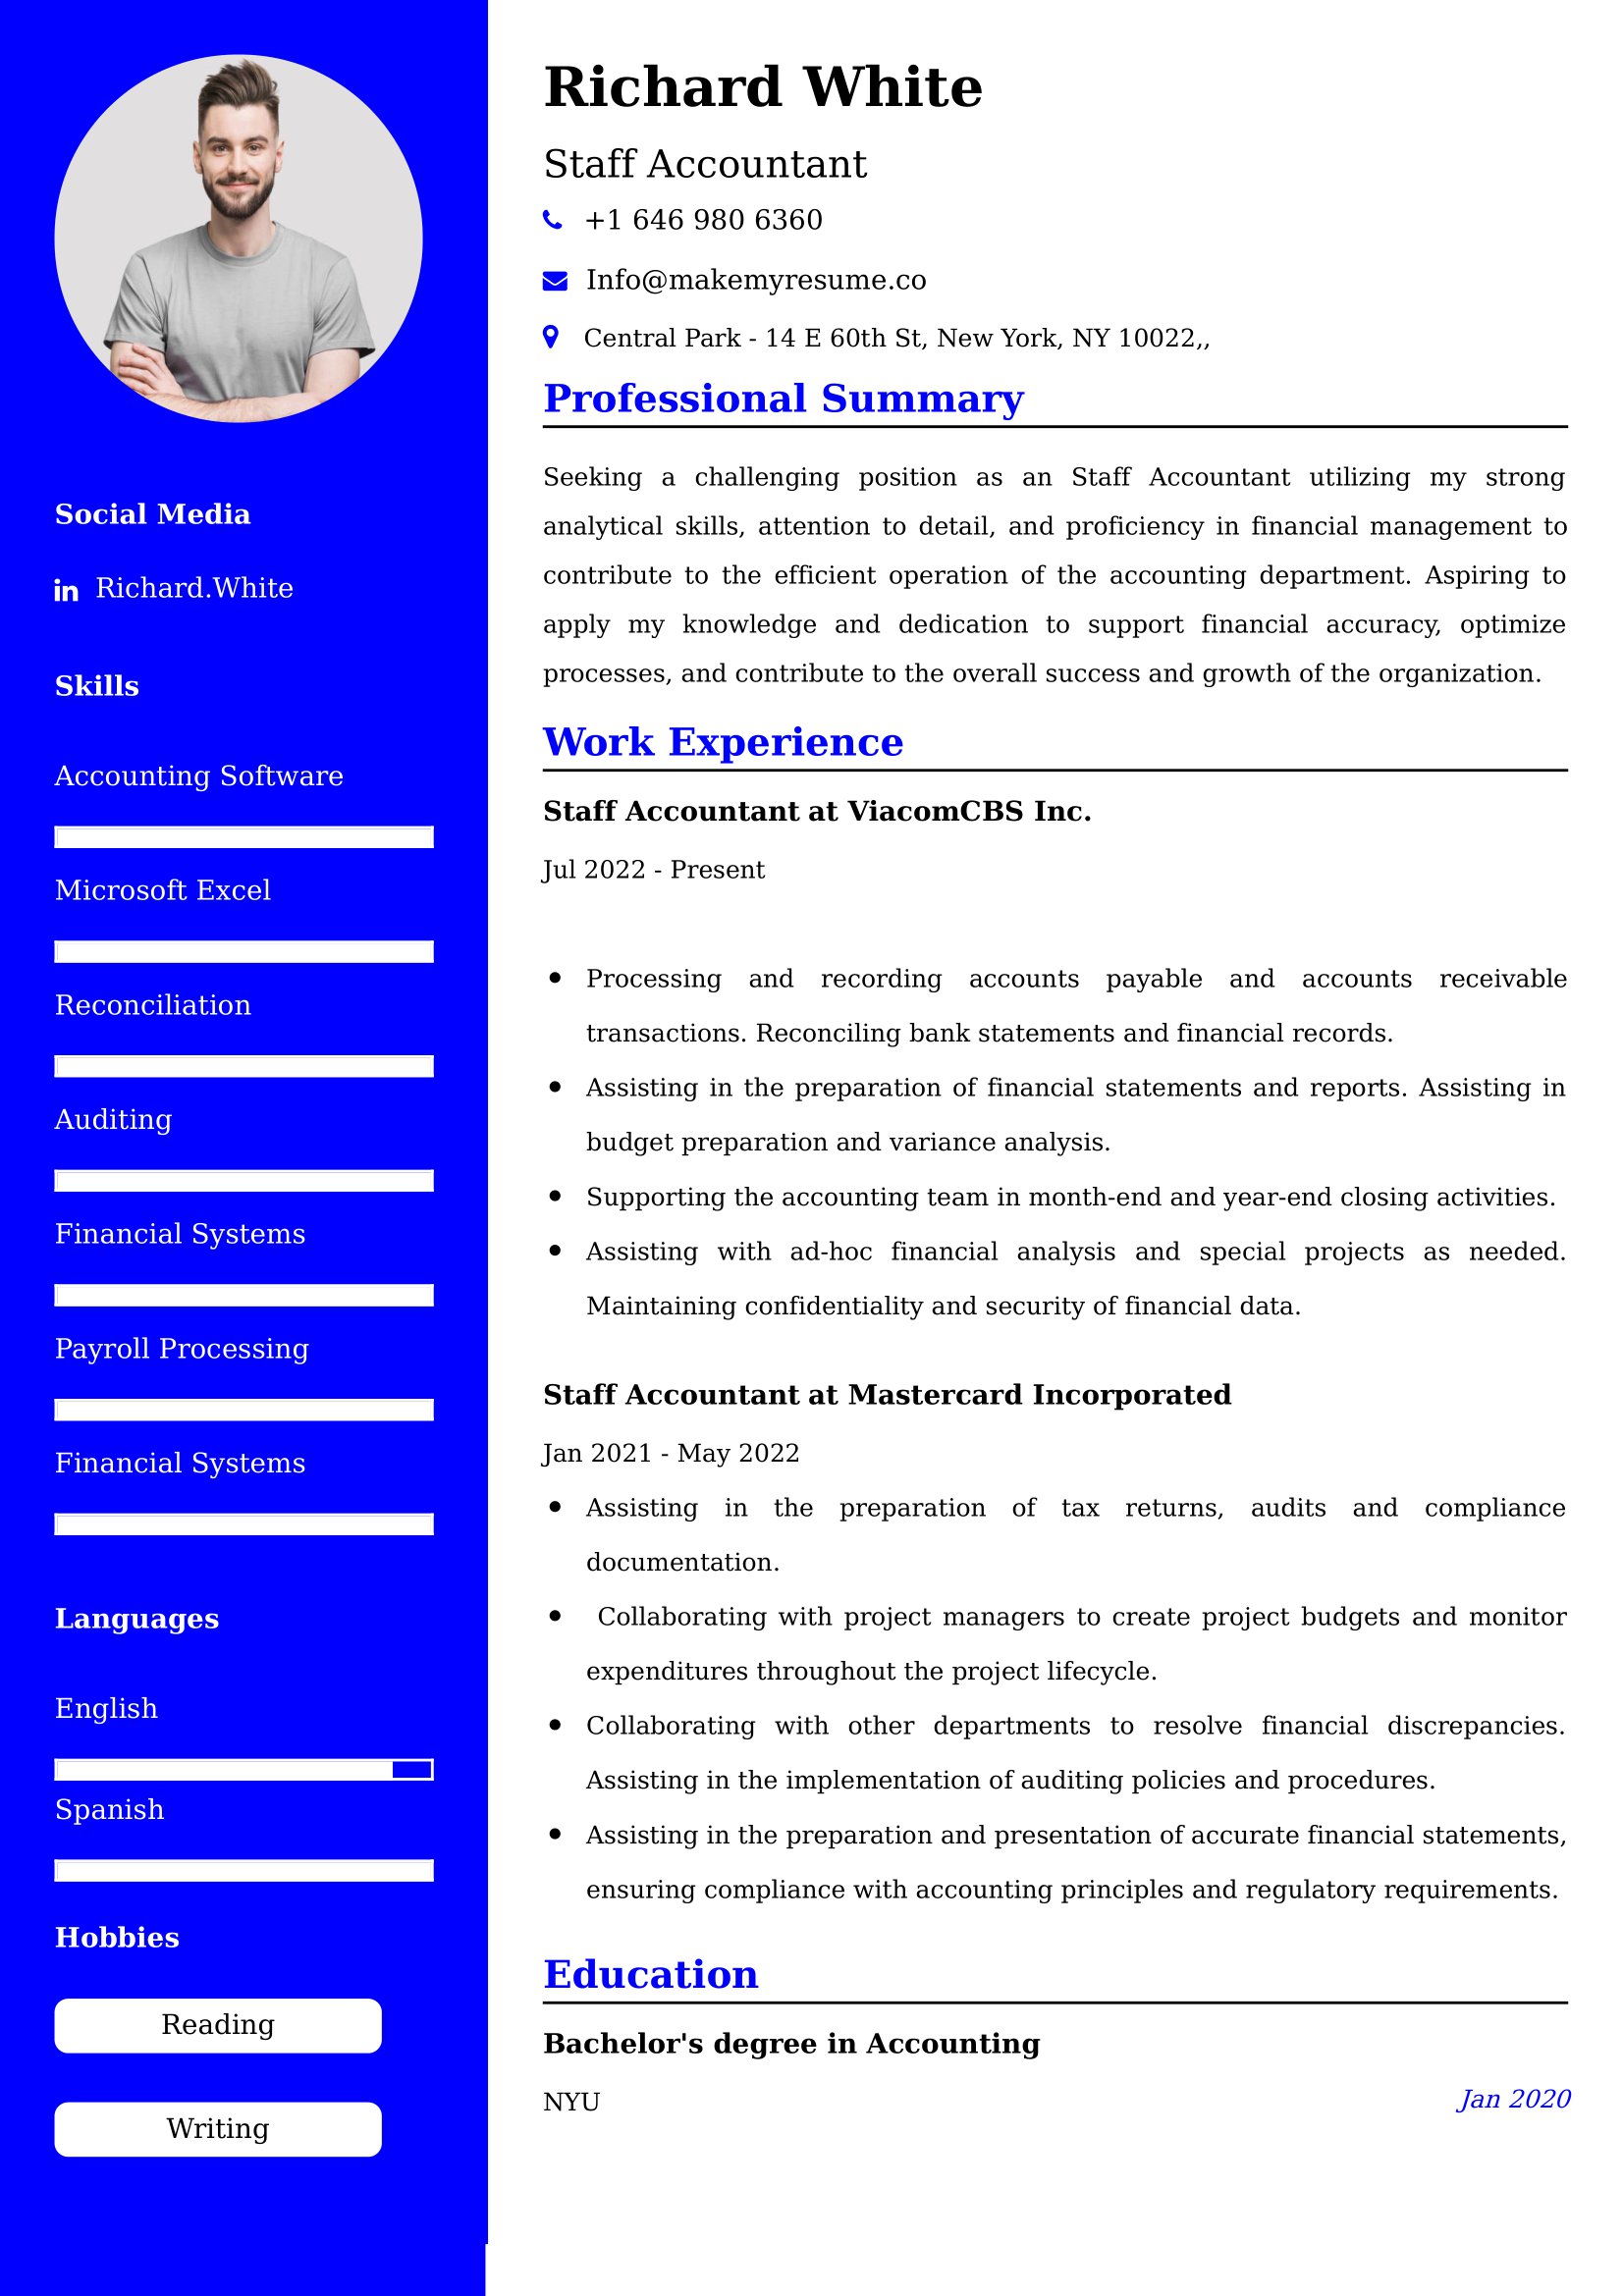 Staff Accountant Resume Examples - UAE Format and Tips.